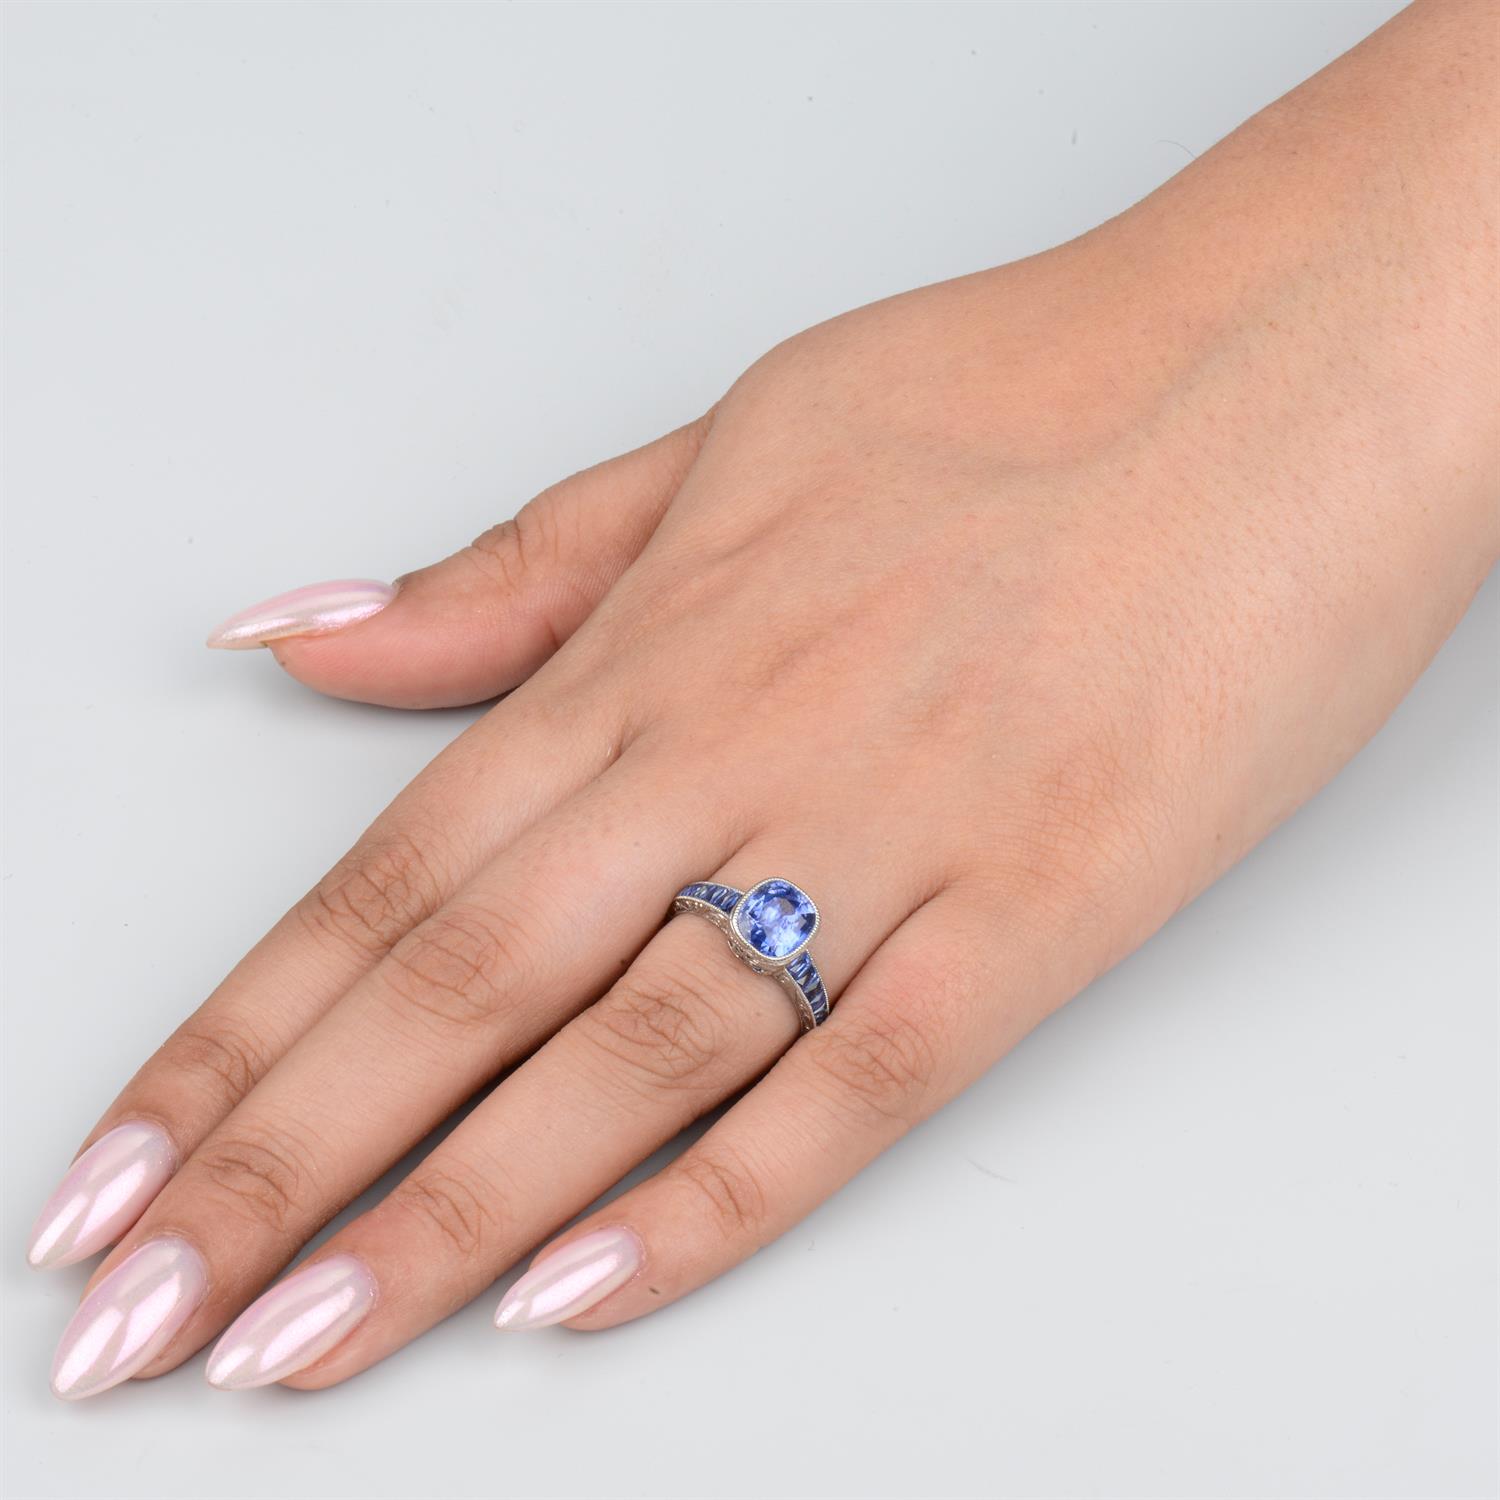 Sapphire ring, by JoAq - Image 7 of 7